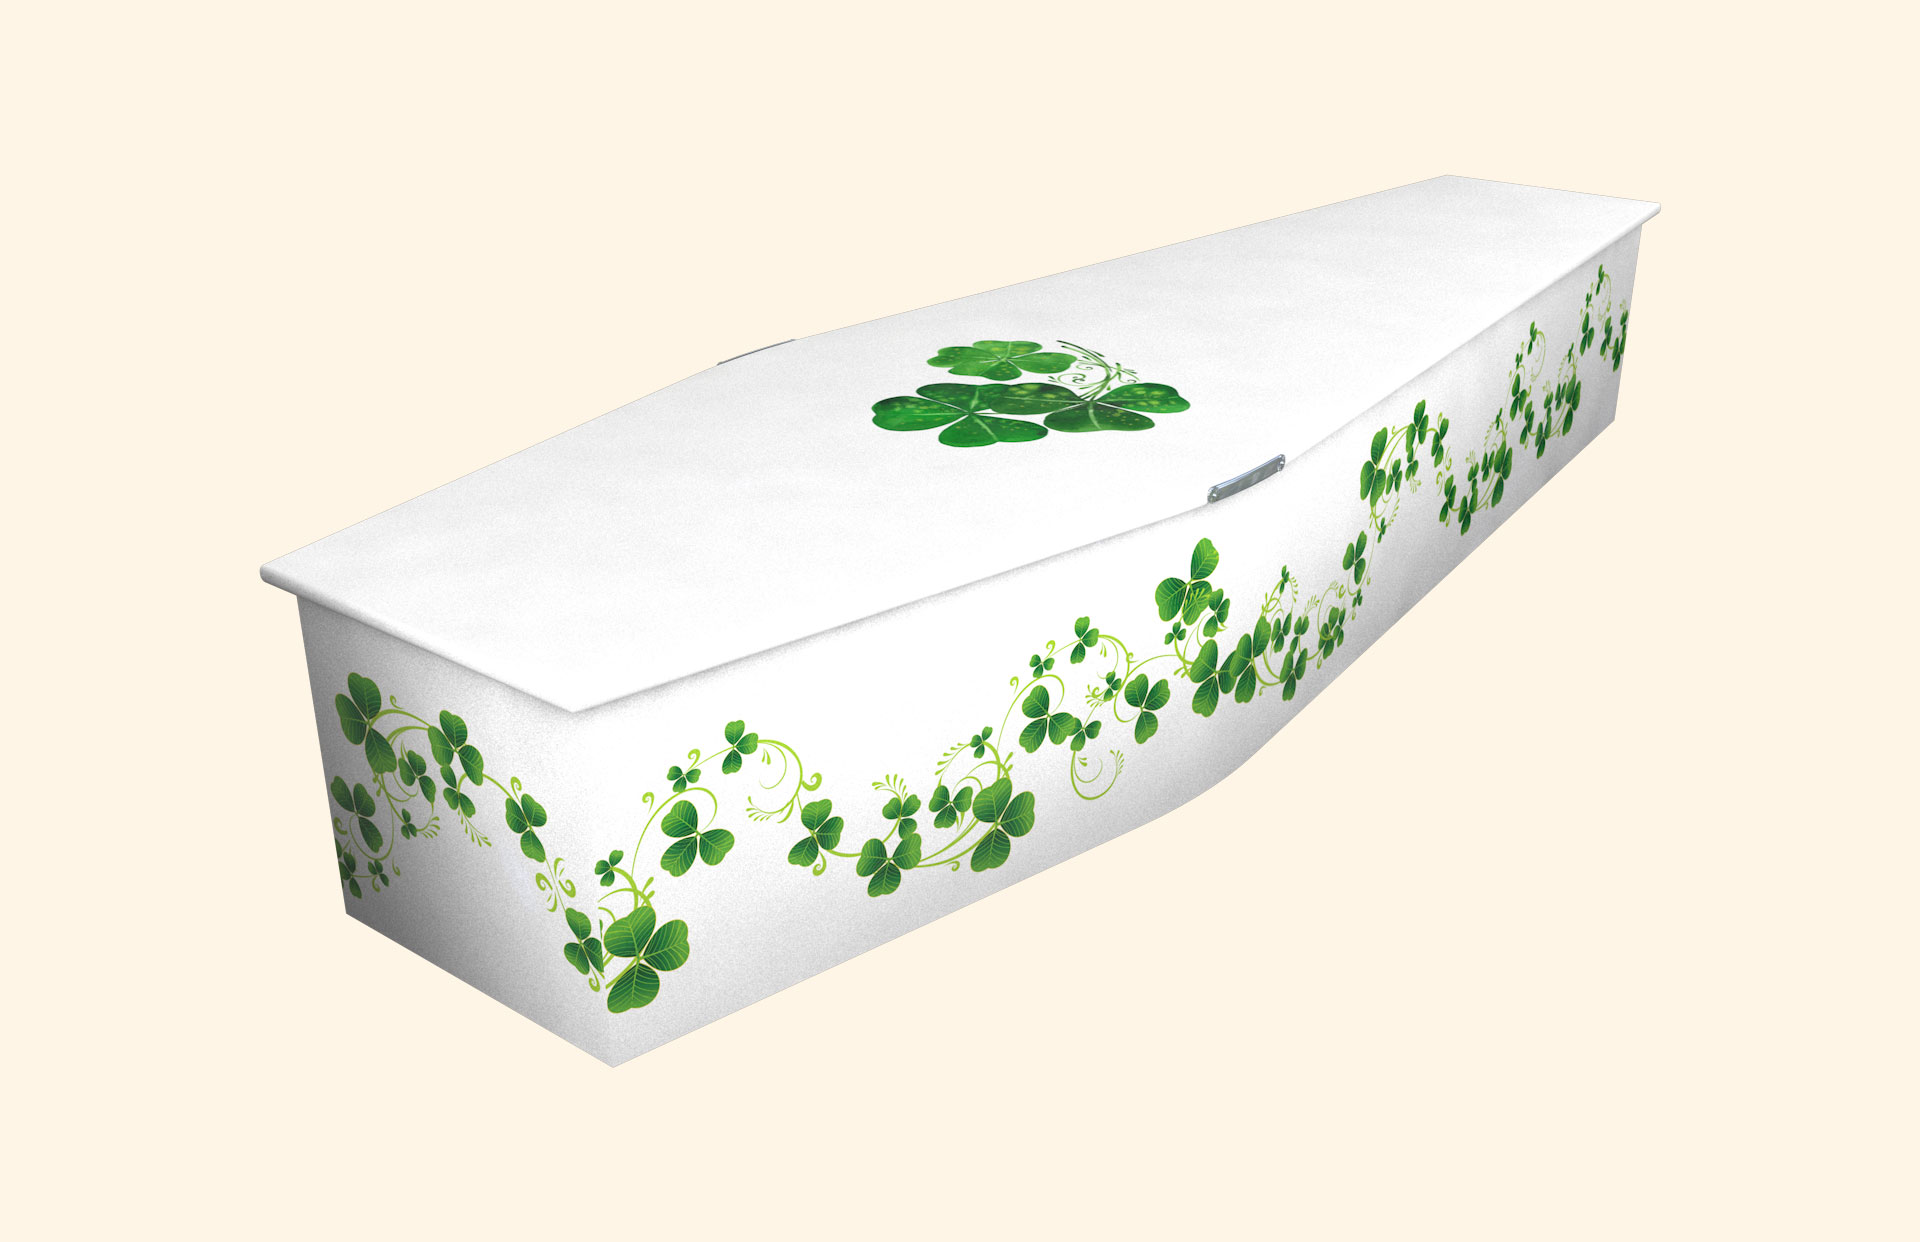 Clover design on a traditional coffin